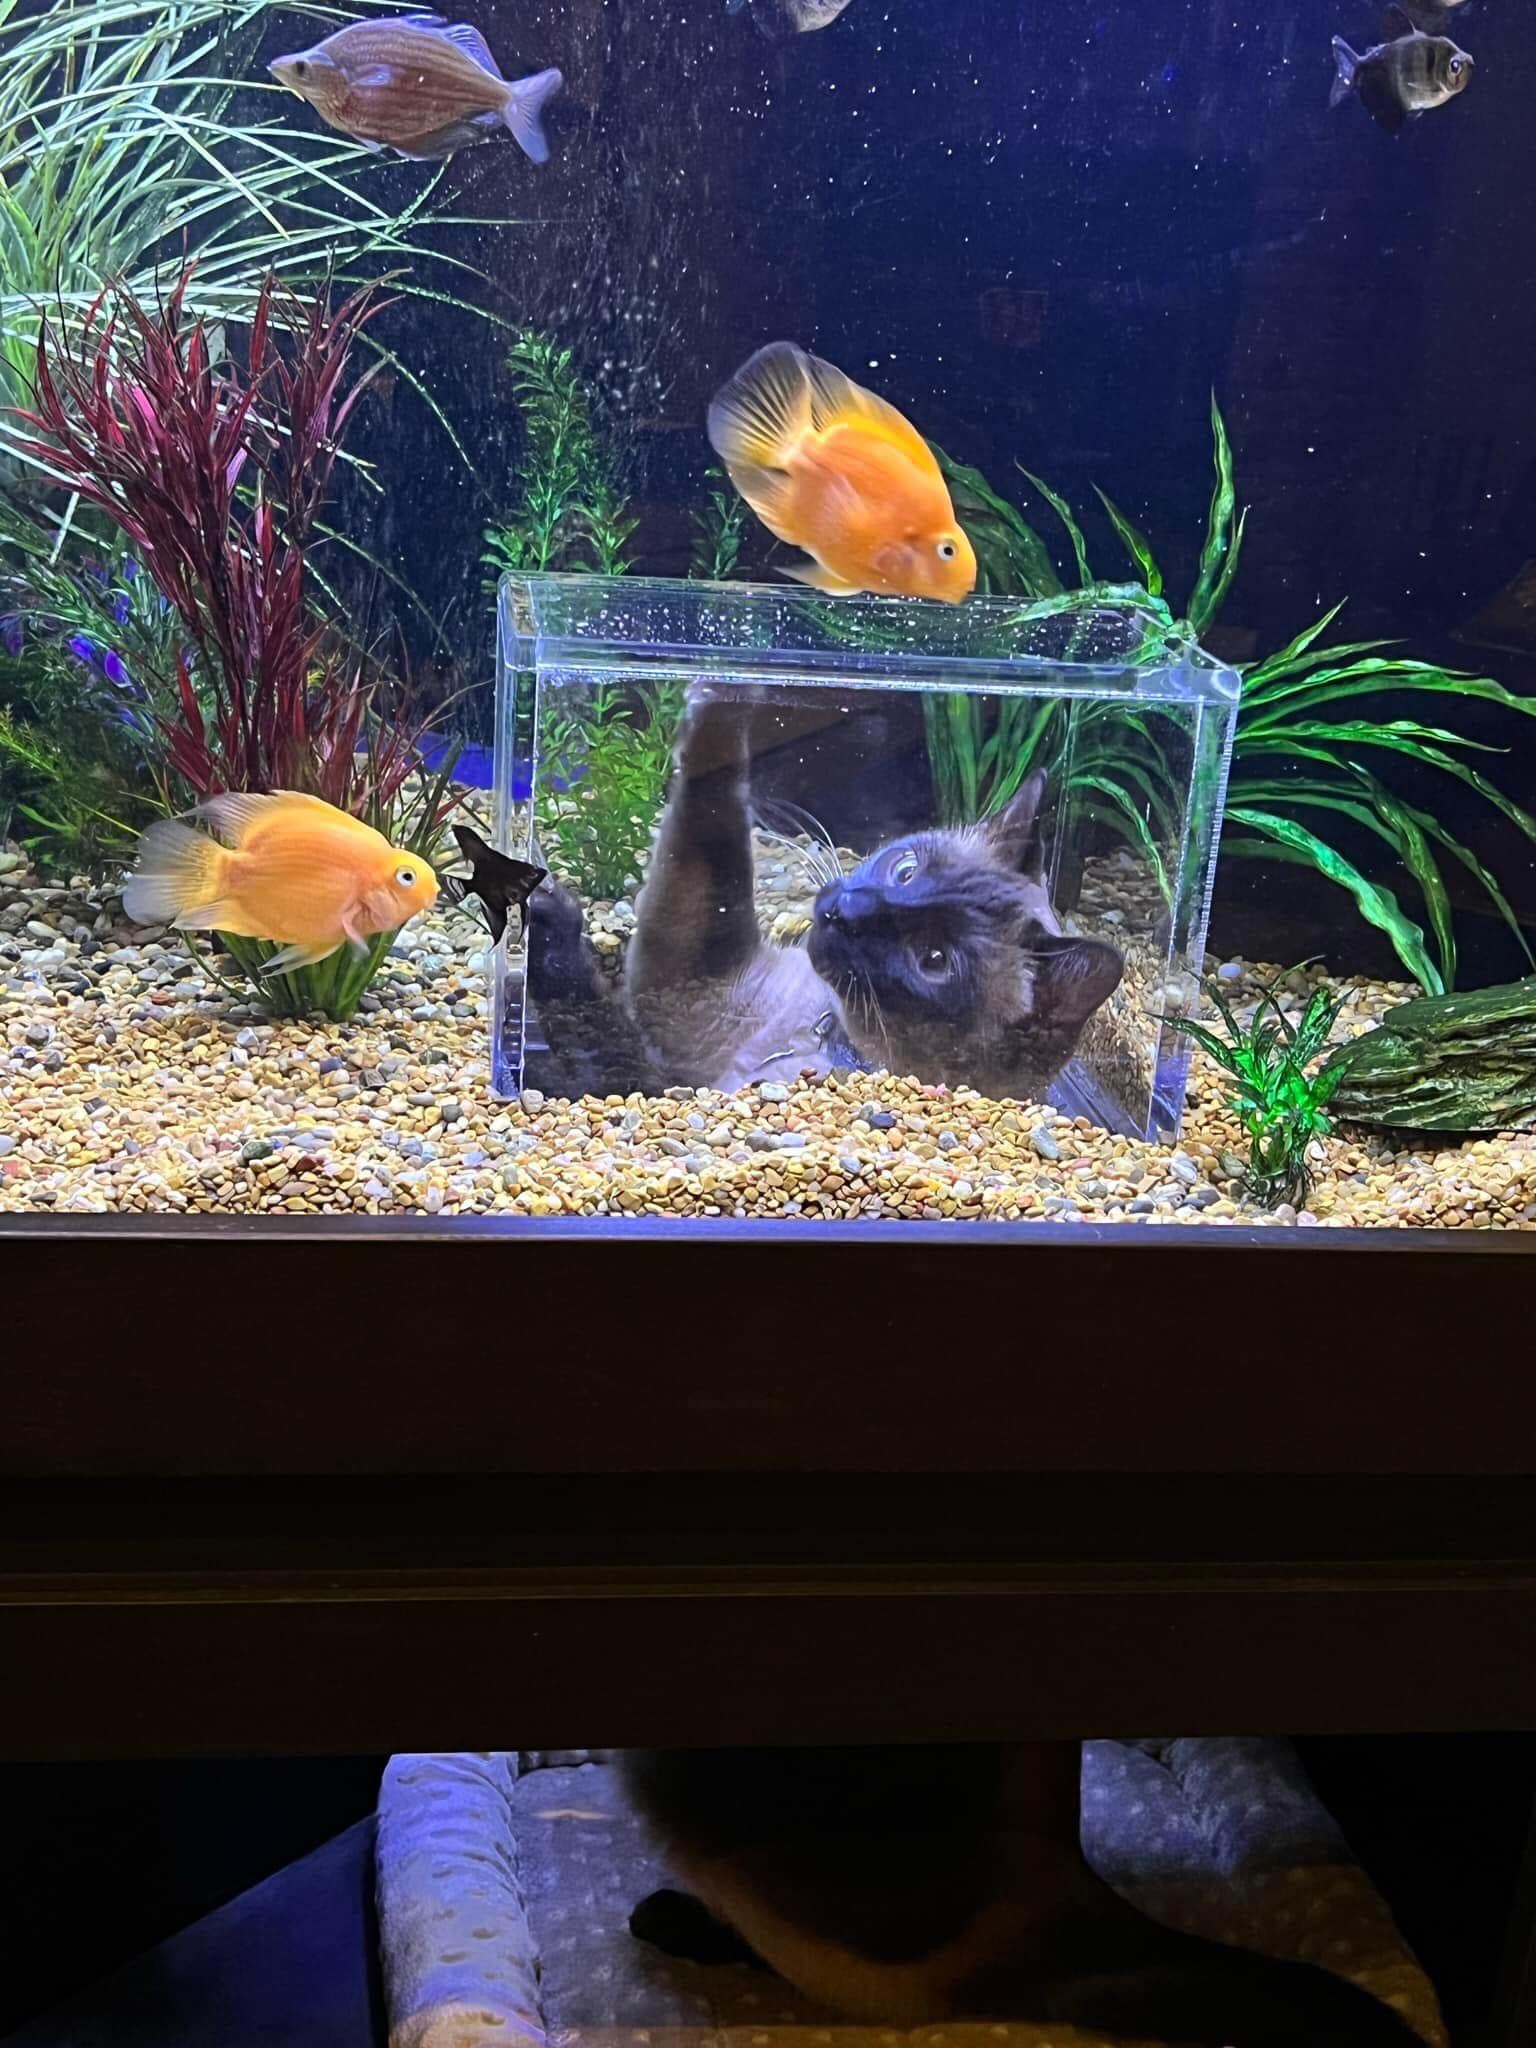 a siamese cat named jasper batting at fish inside of a tank while he's inside a cube shaped indention at the bottom of the tank